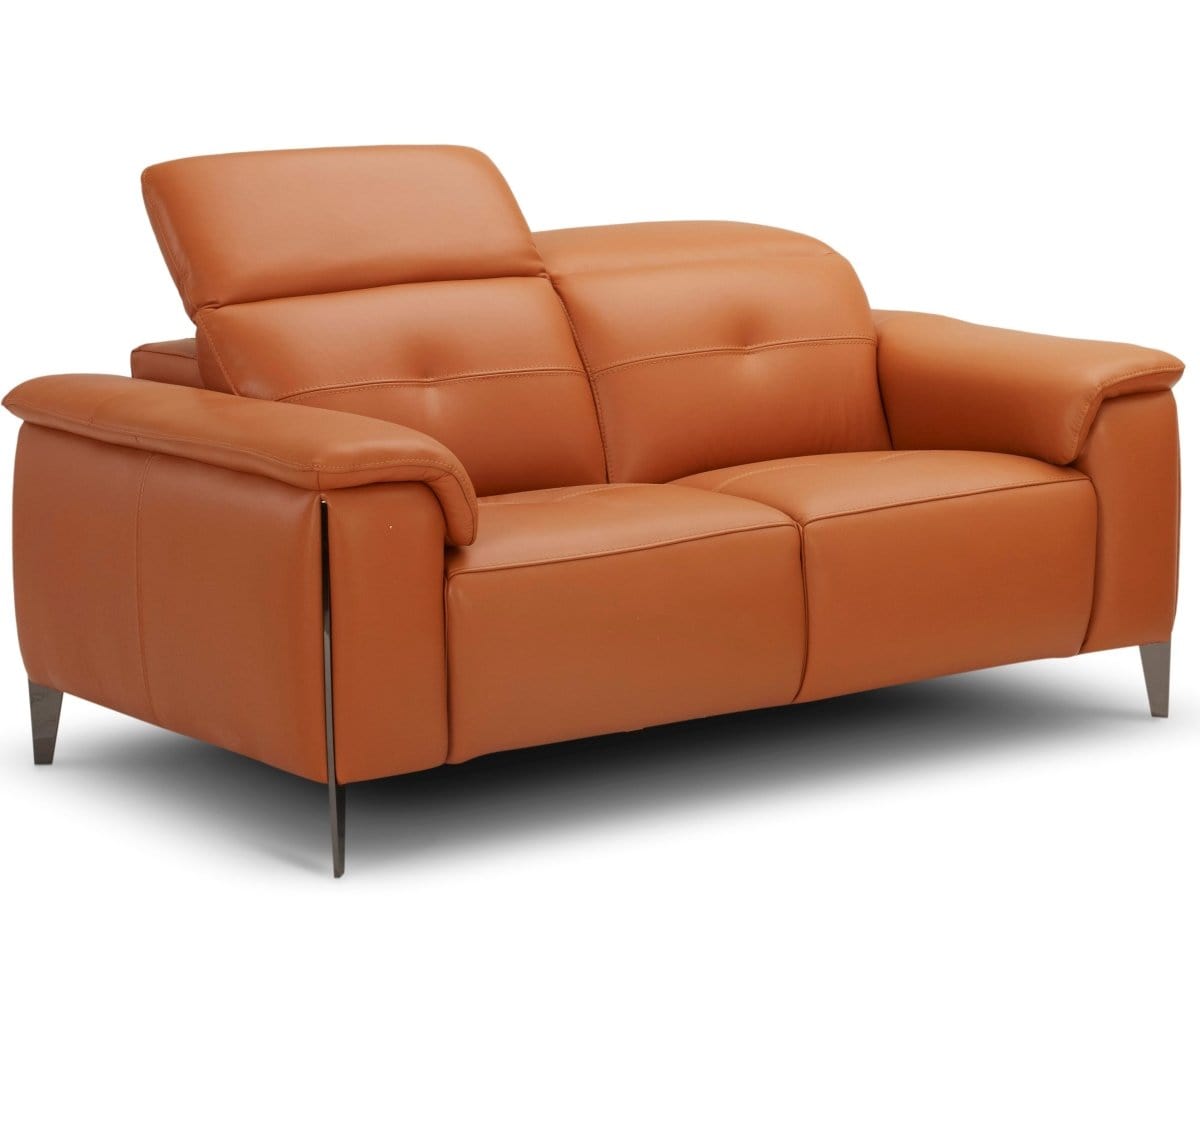 KUKA KM.5065 Electrical Fabric Recliner Sofa 2/3-Seater (Fabric C) (I) picket and rail